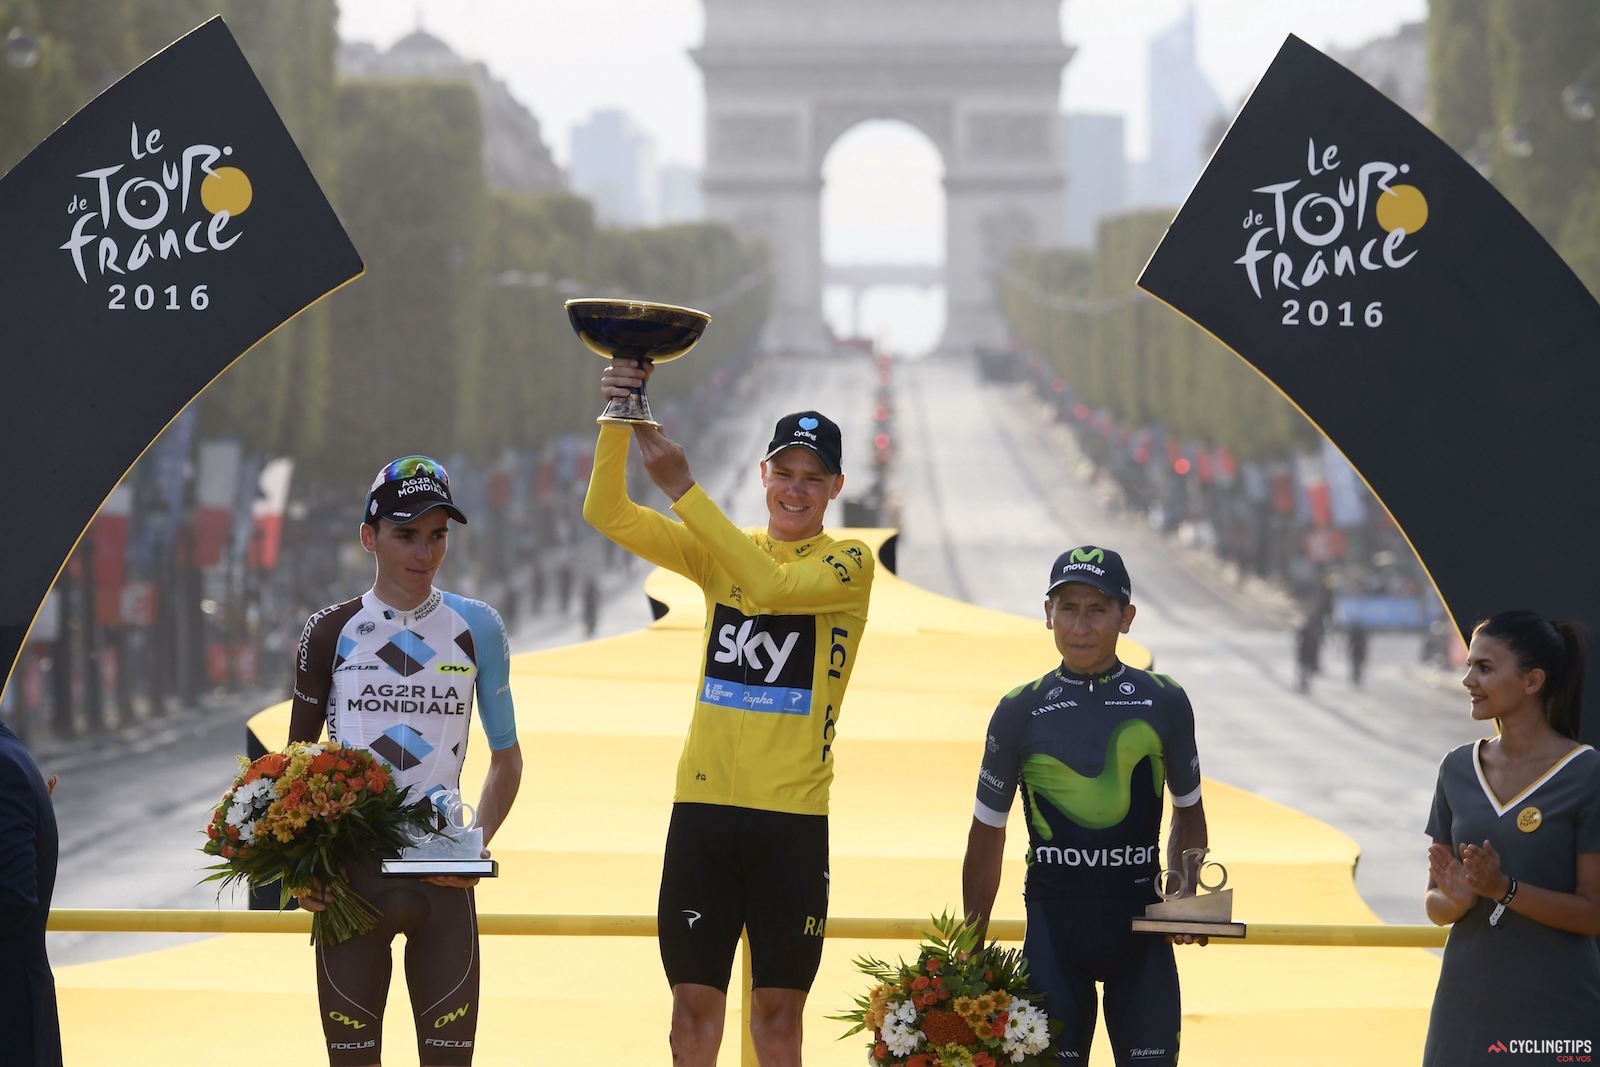 Paris - France - wielrennen - cycling - radsport - cyclisme - Romain Bardet (FRA-AG2R-La Mondiale) - Christopher - Chris Froome (Norway / Team Sky) - Nairo Quintana (COL-Movistar) pictured during stage 21 of the 2016 Tour de France from Chantilly to Paris, 113.00 km - photo Cor Vos © 2016